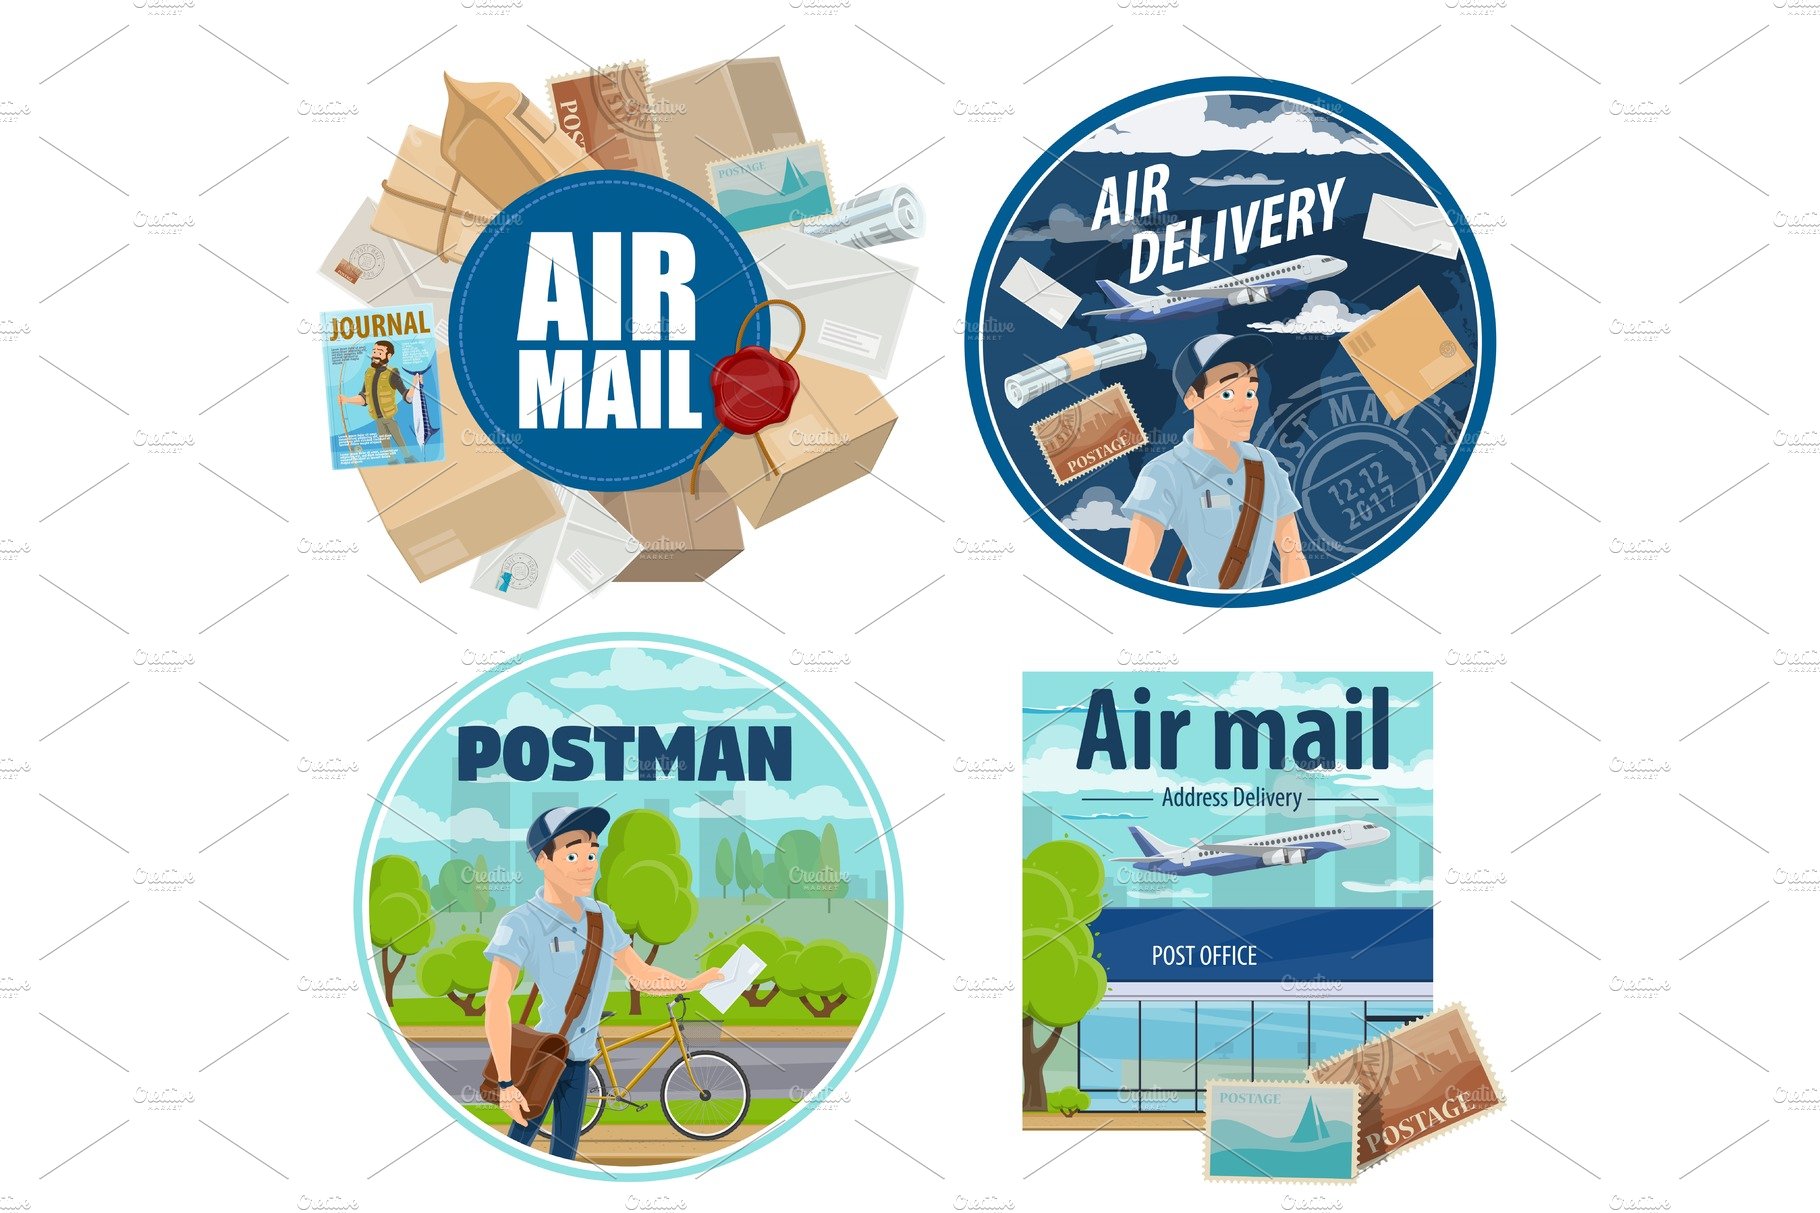 Mail delivery, postman, post parcels cover image.